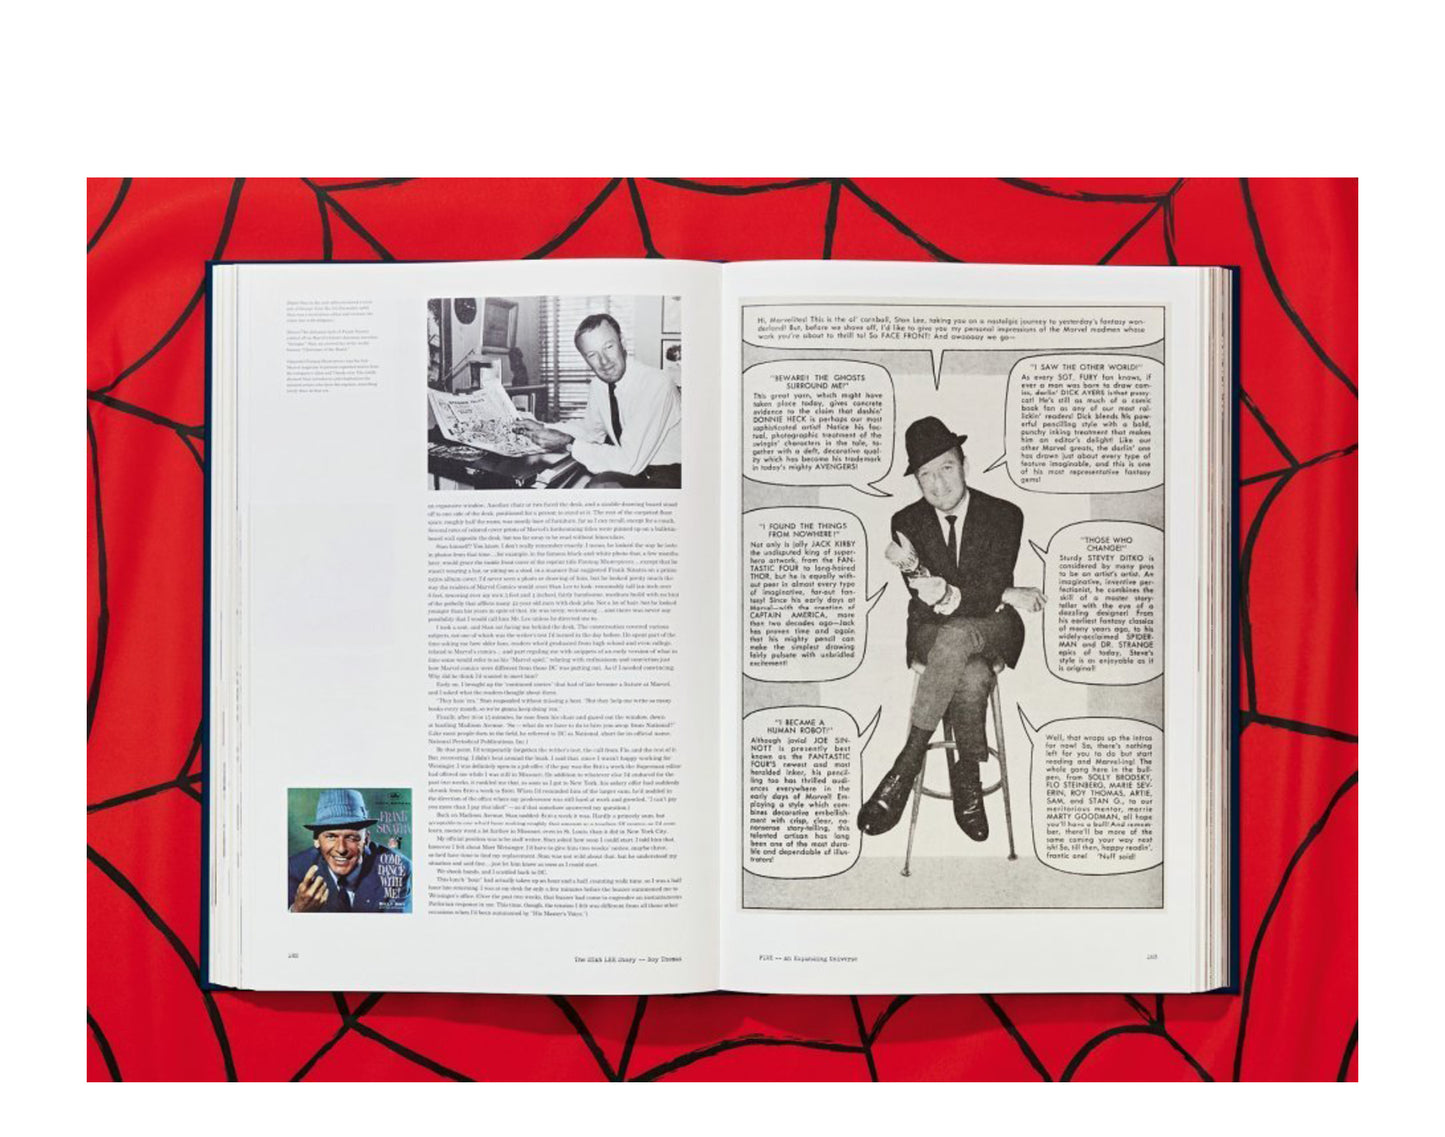 Taschen Books - The Stan Lee Story Hardcover Book